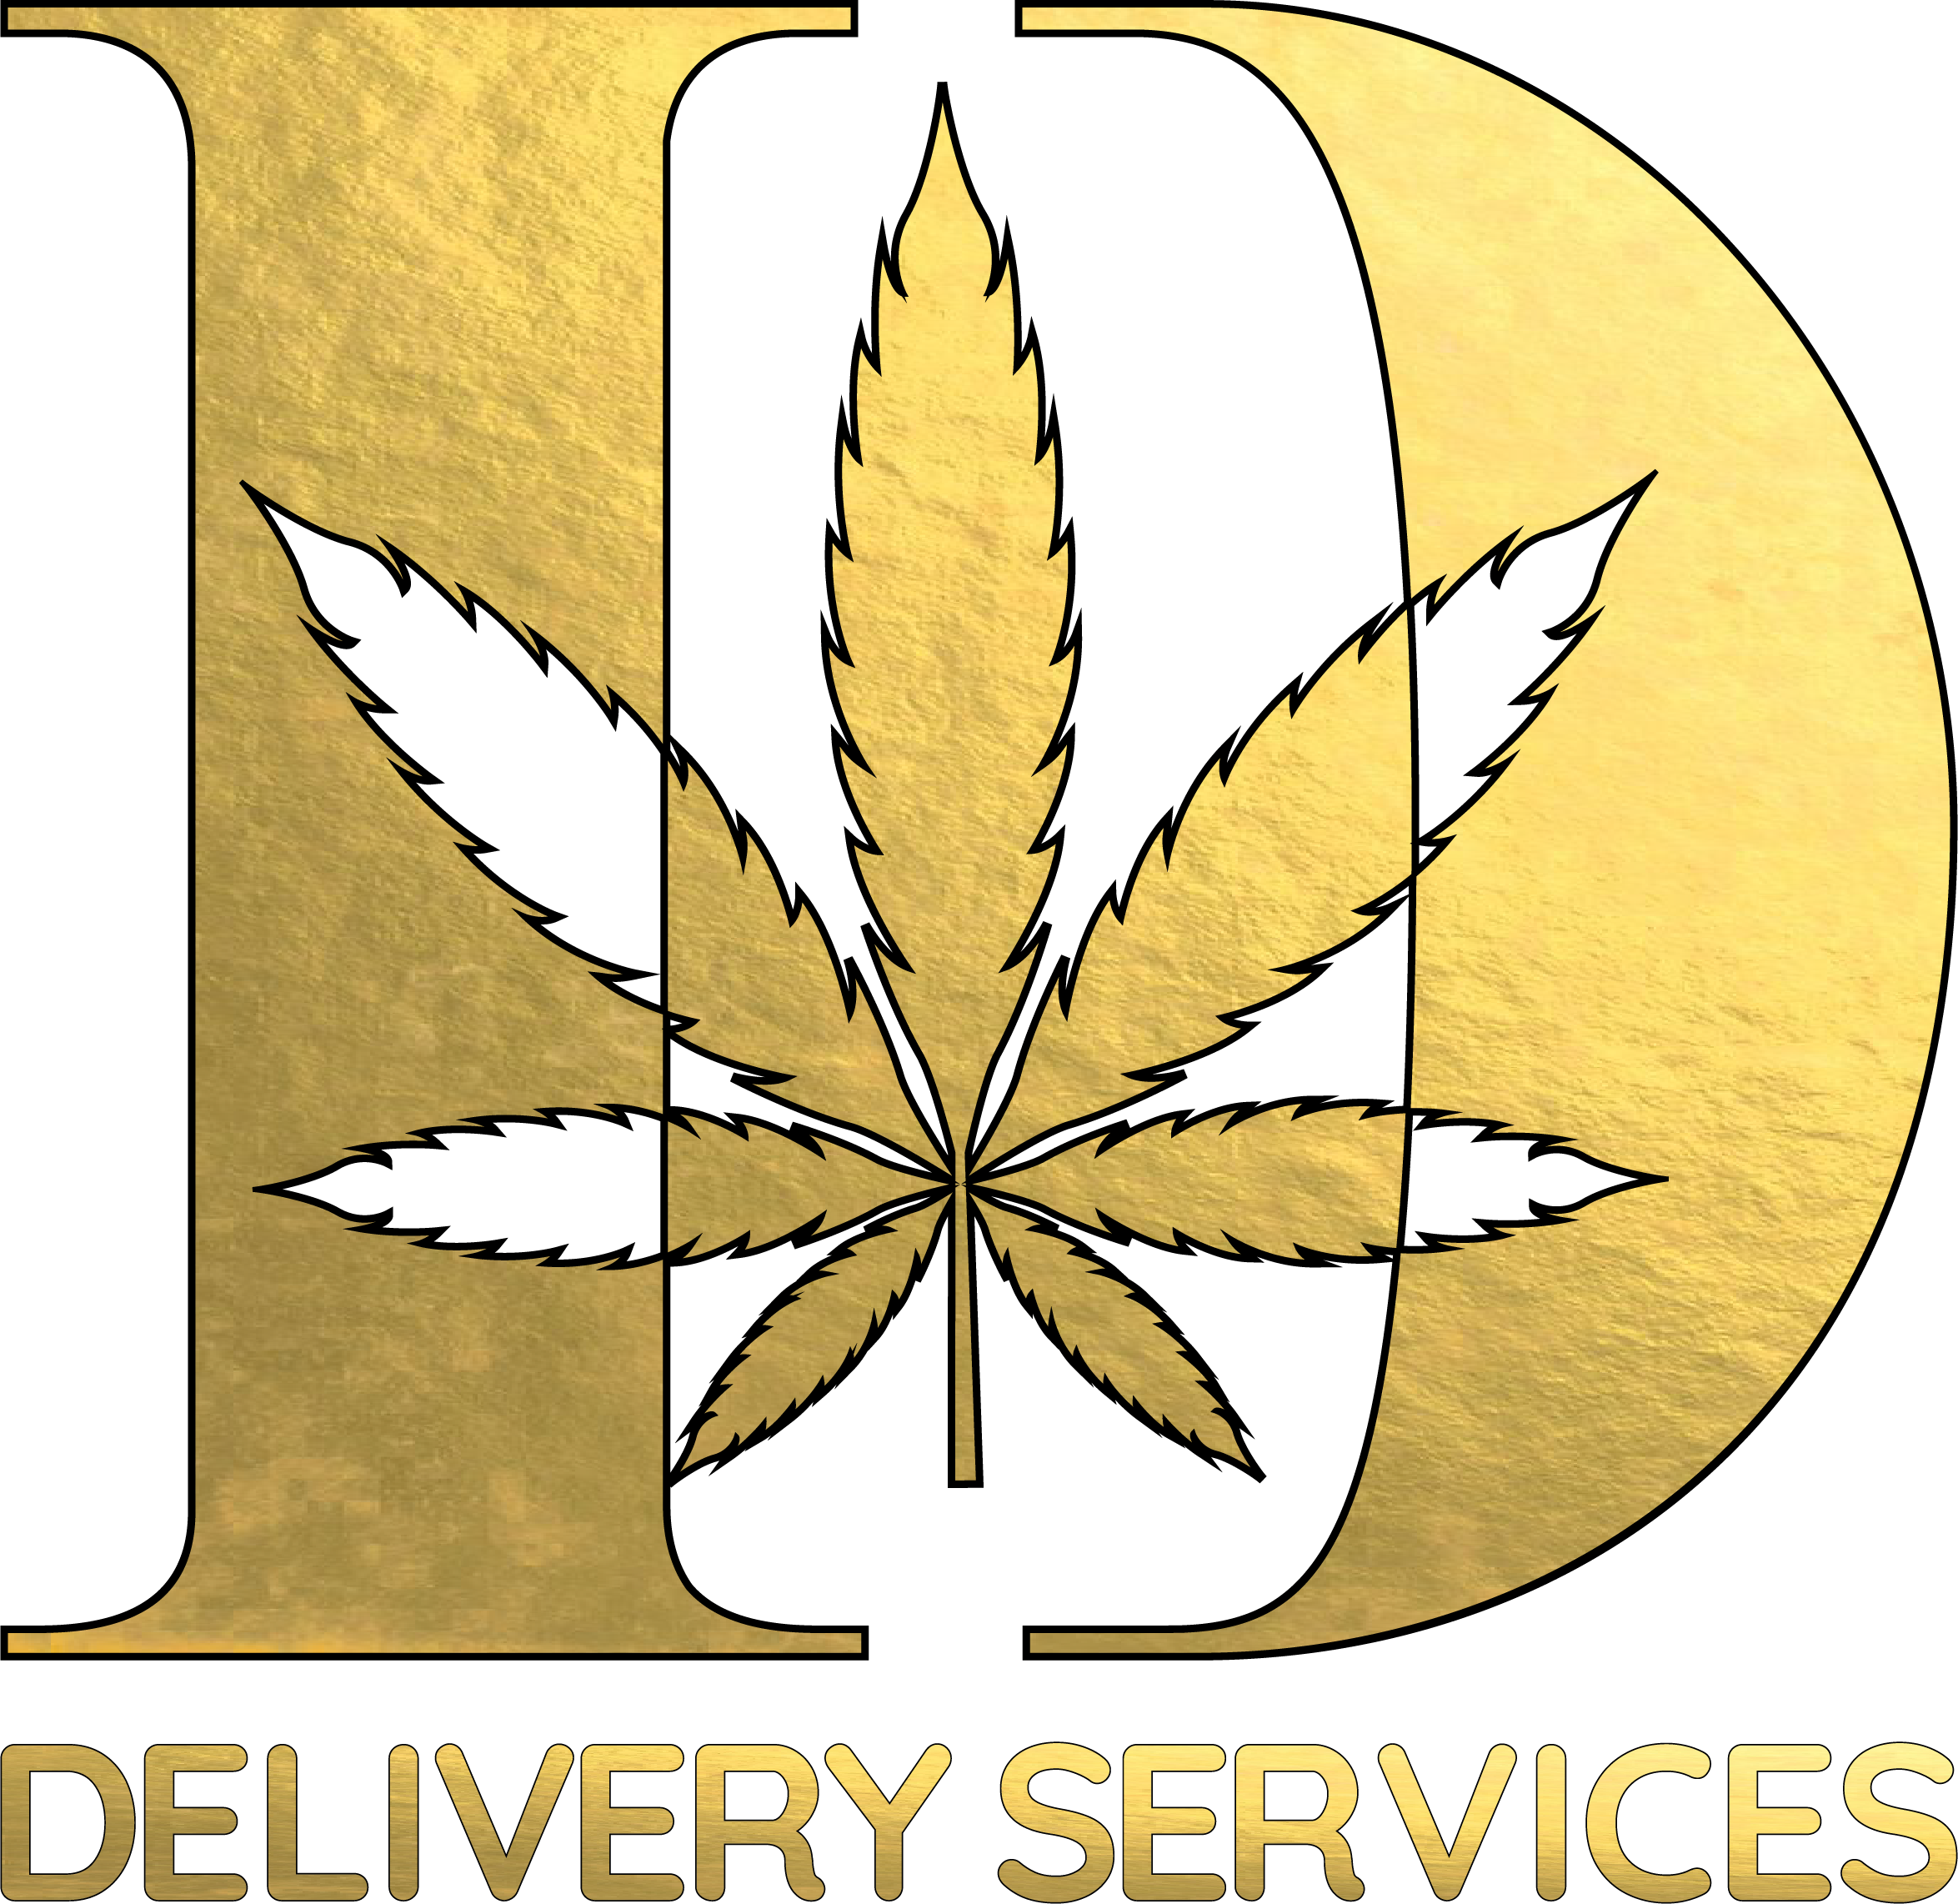 The Best Affordable Cannabid Delivery Serviice, Serving The South OC & IE.